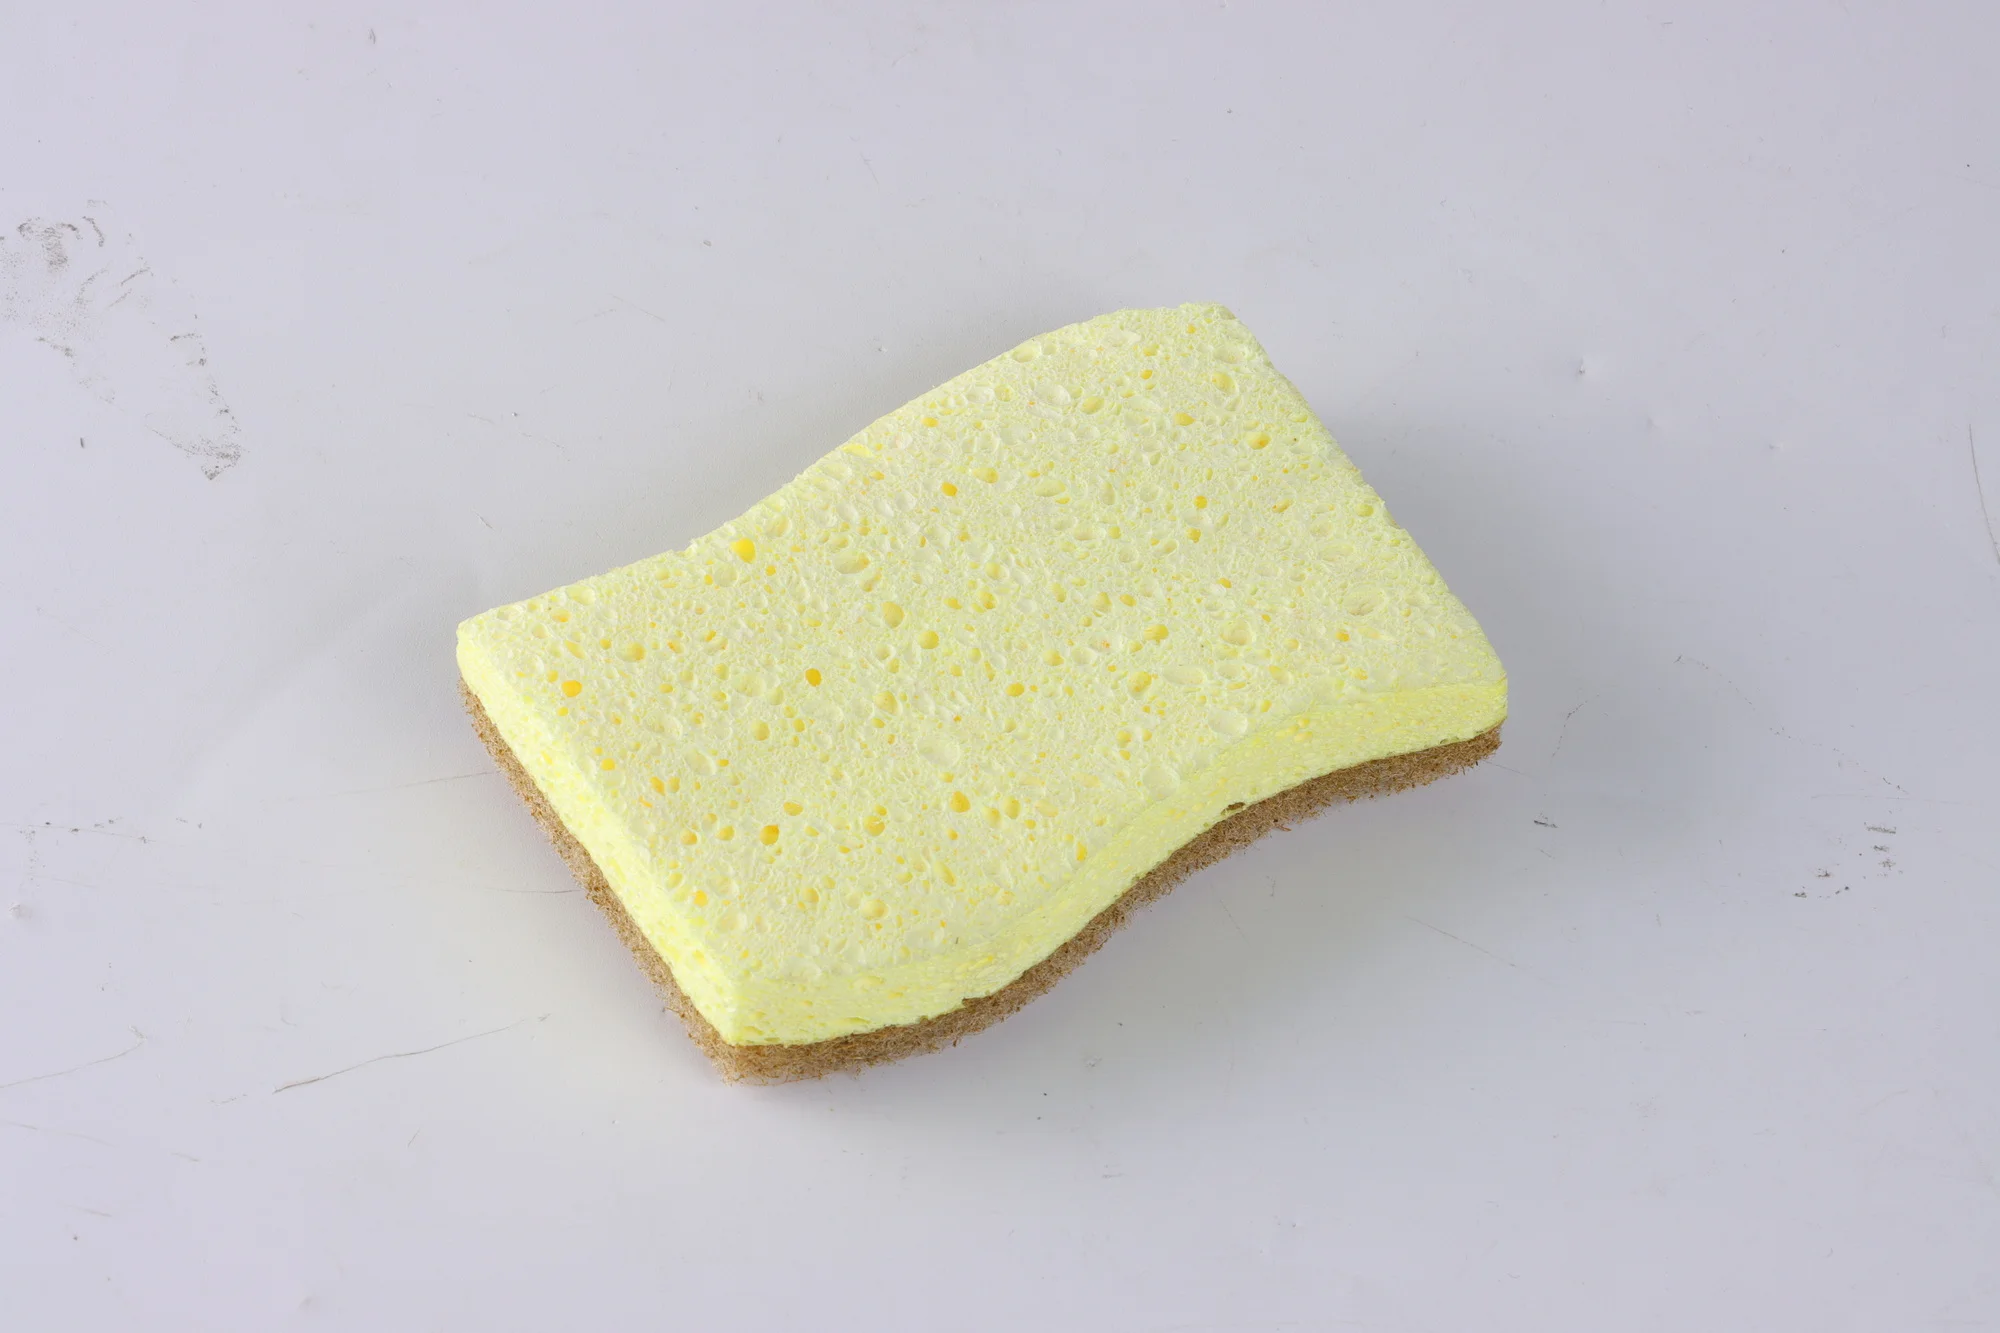 Wholesale Scouring Doodlebug Water Filter Foam Absorb Sponge Washing Dishes Tool Wash Cloth White Polishing Pads